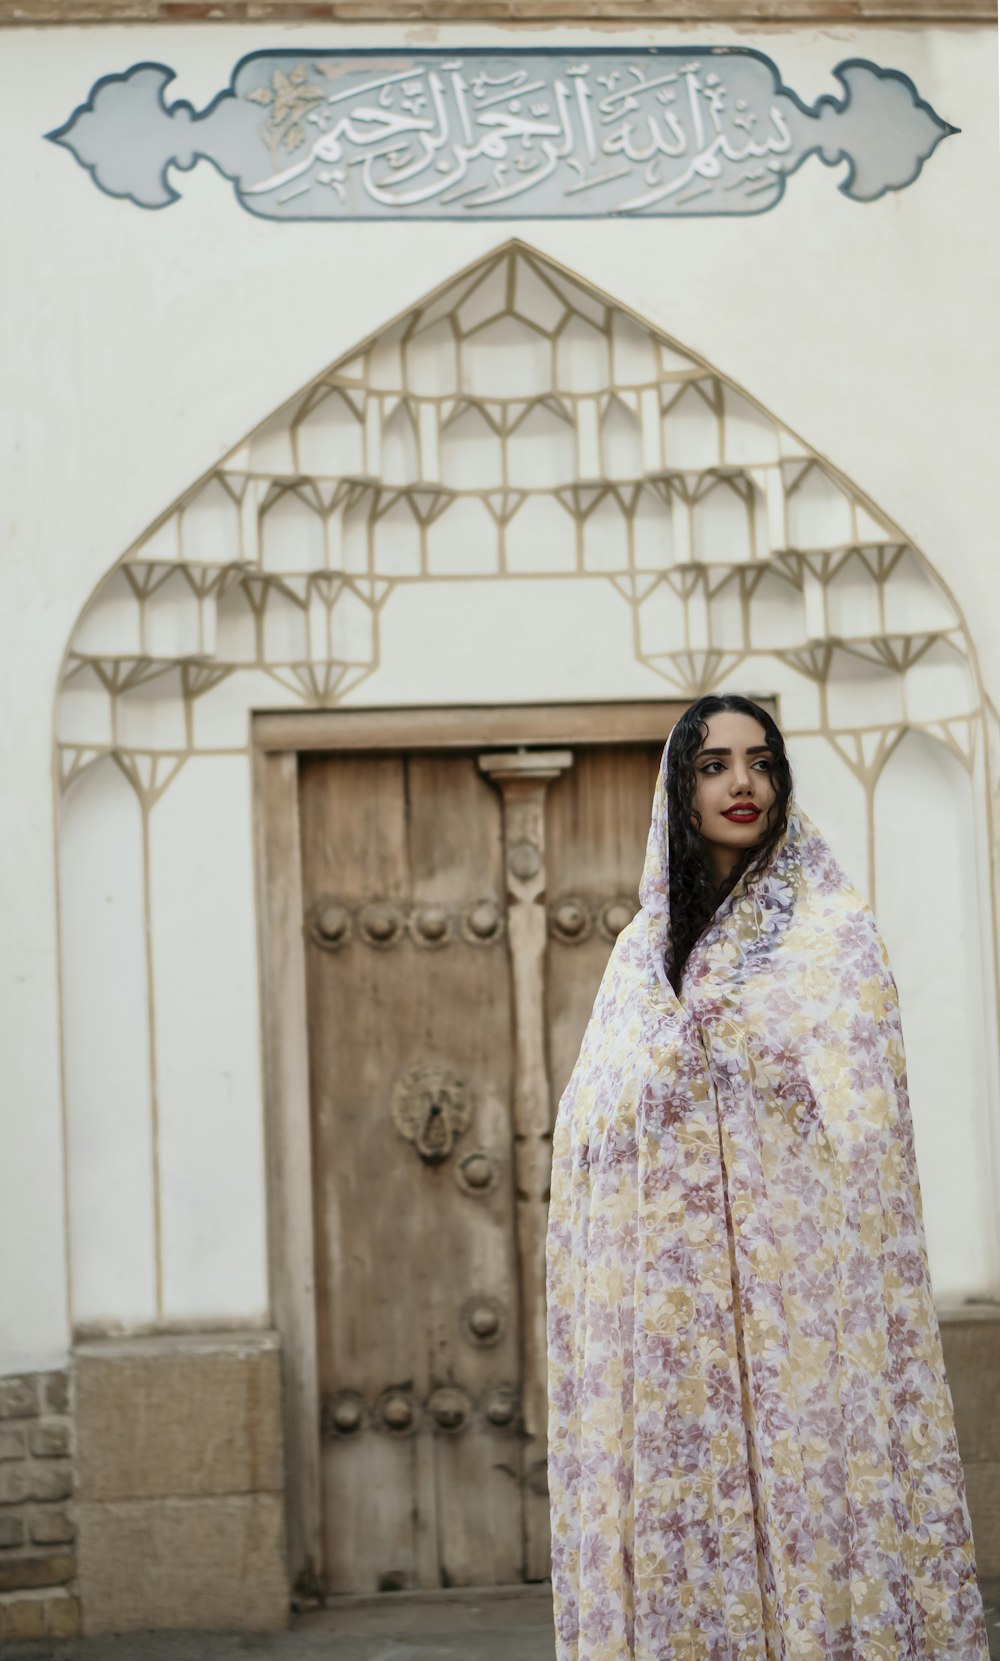 woman in white and purple floral hijab standing near brown wooden door